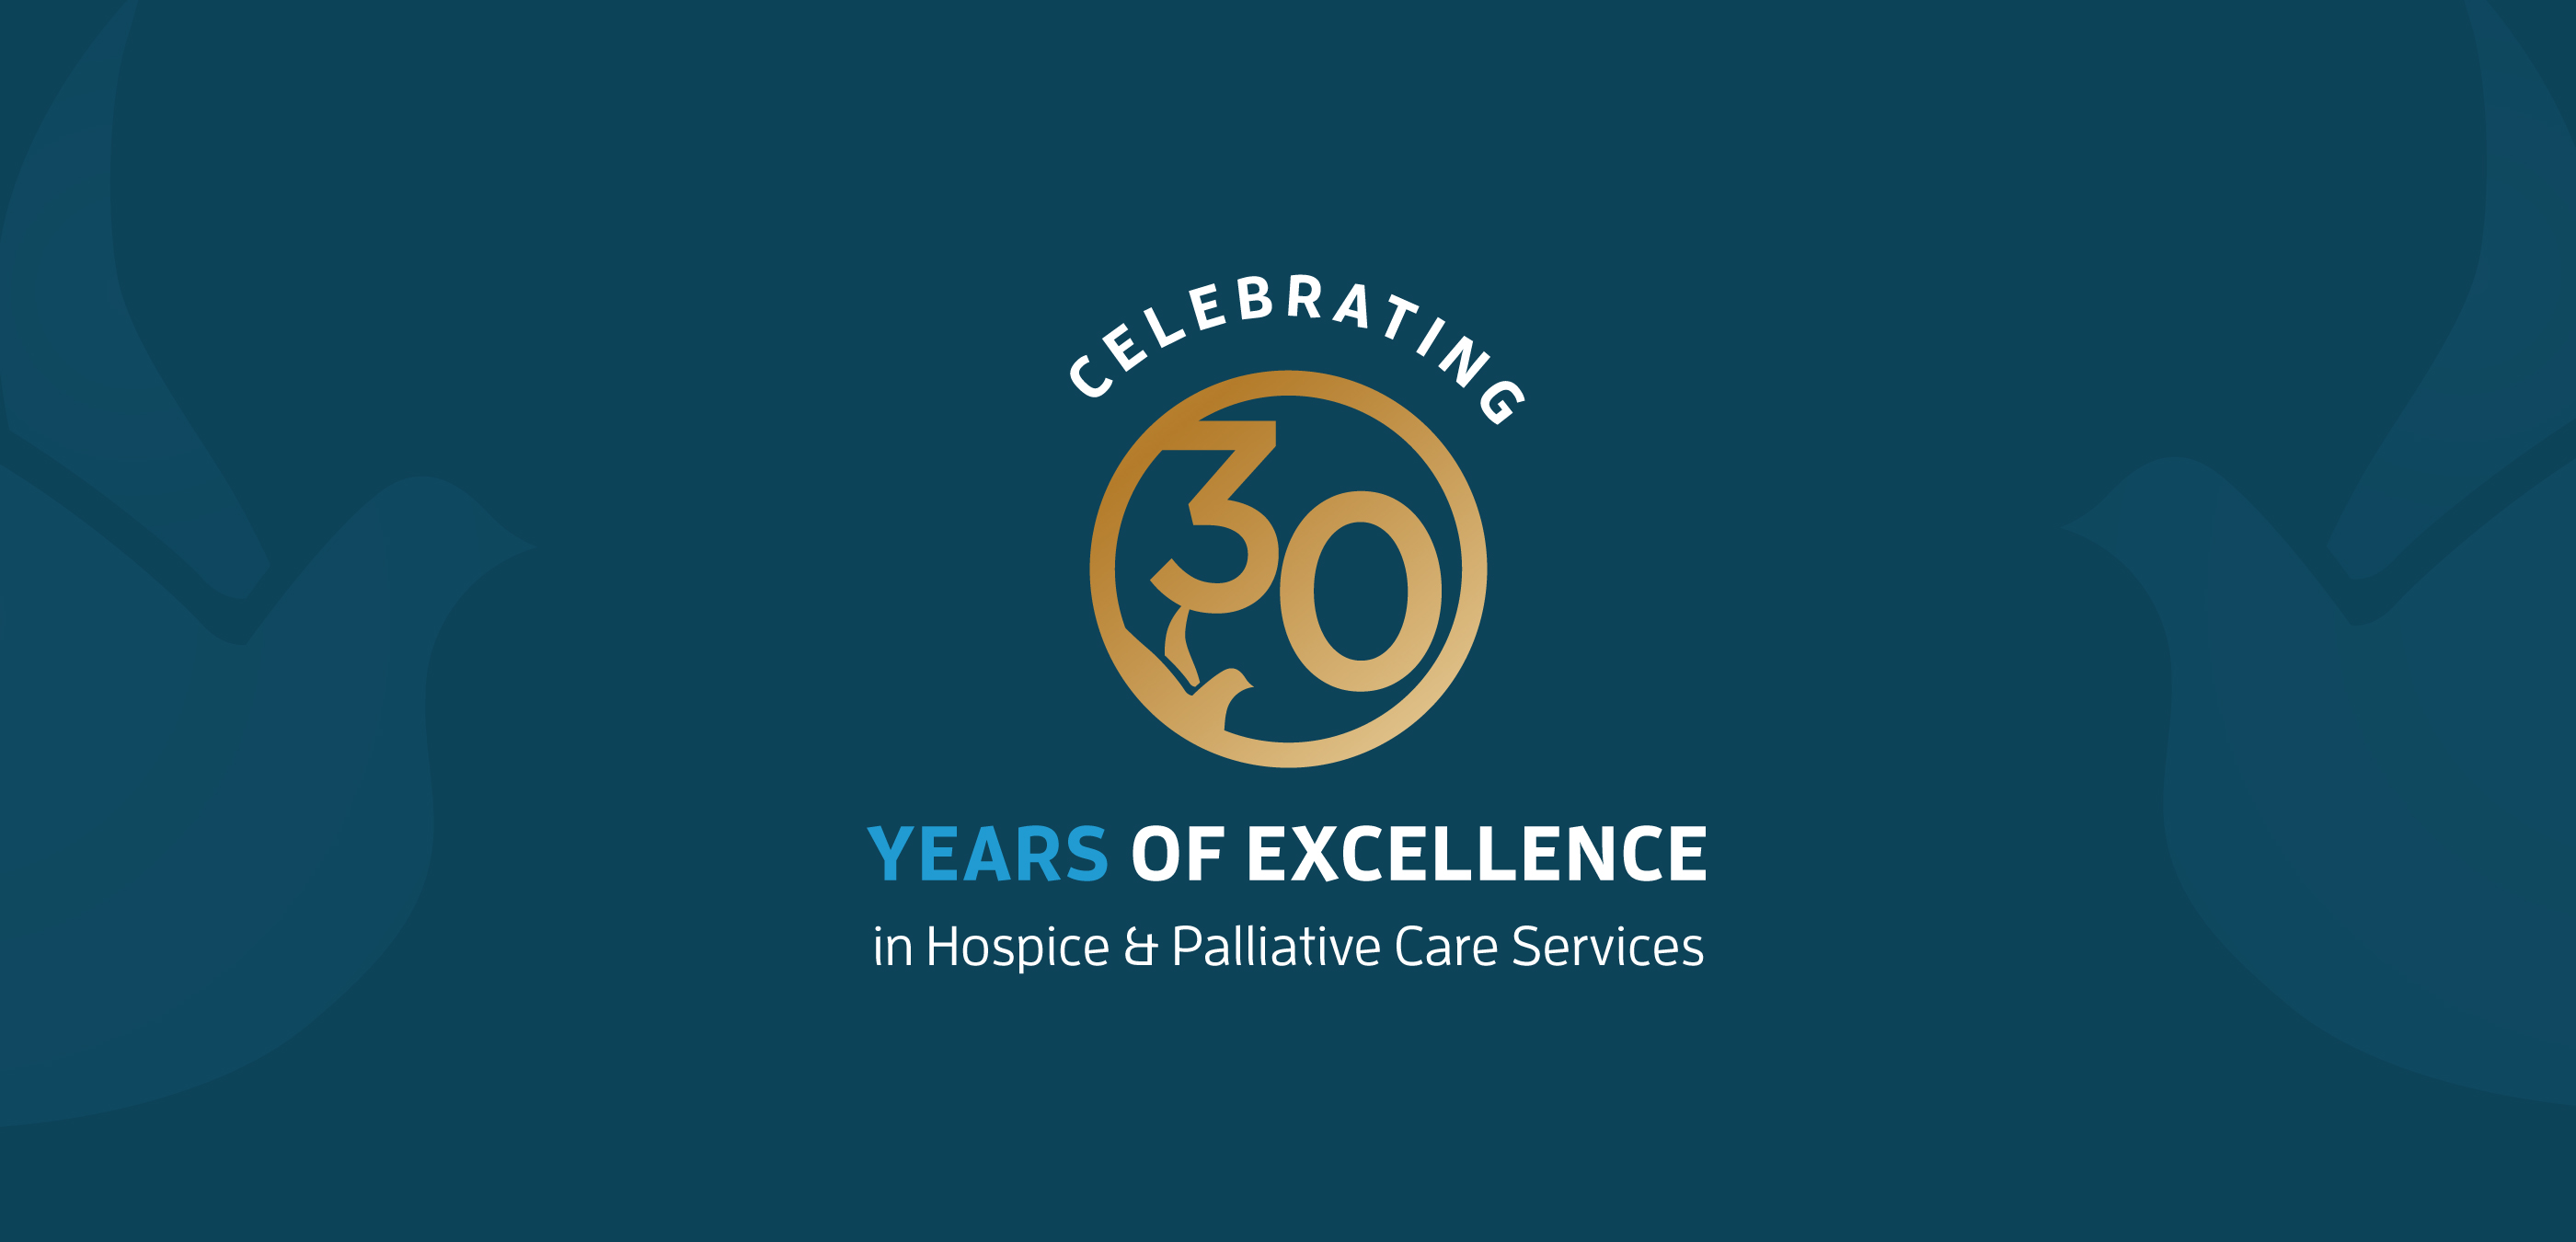 Celebrating 30 Years of Excellence in Hospice & Palliative Care Services